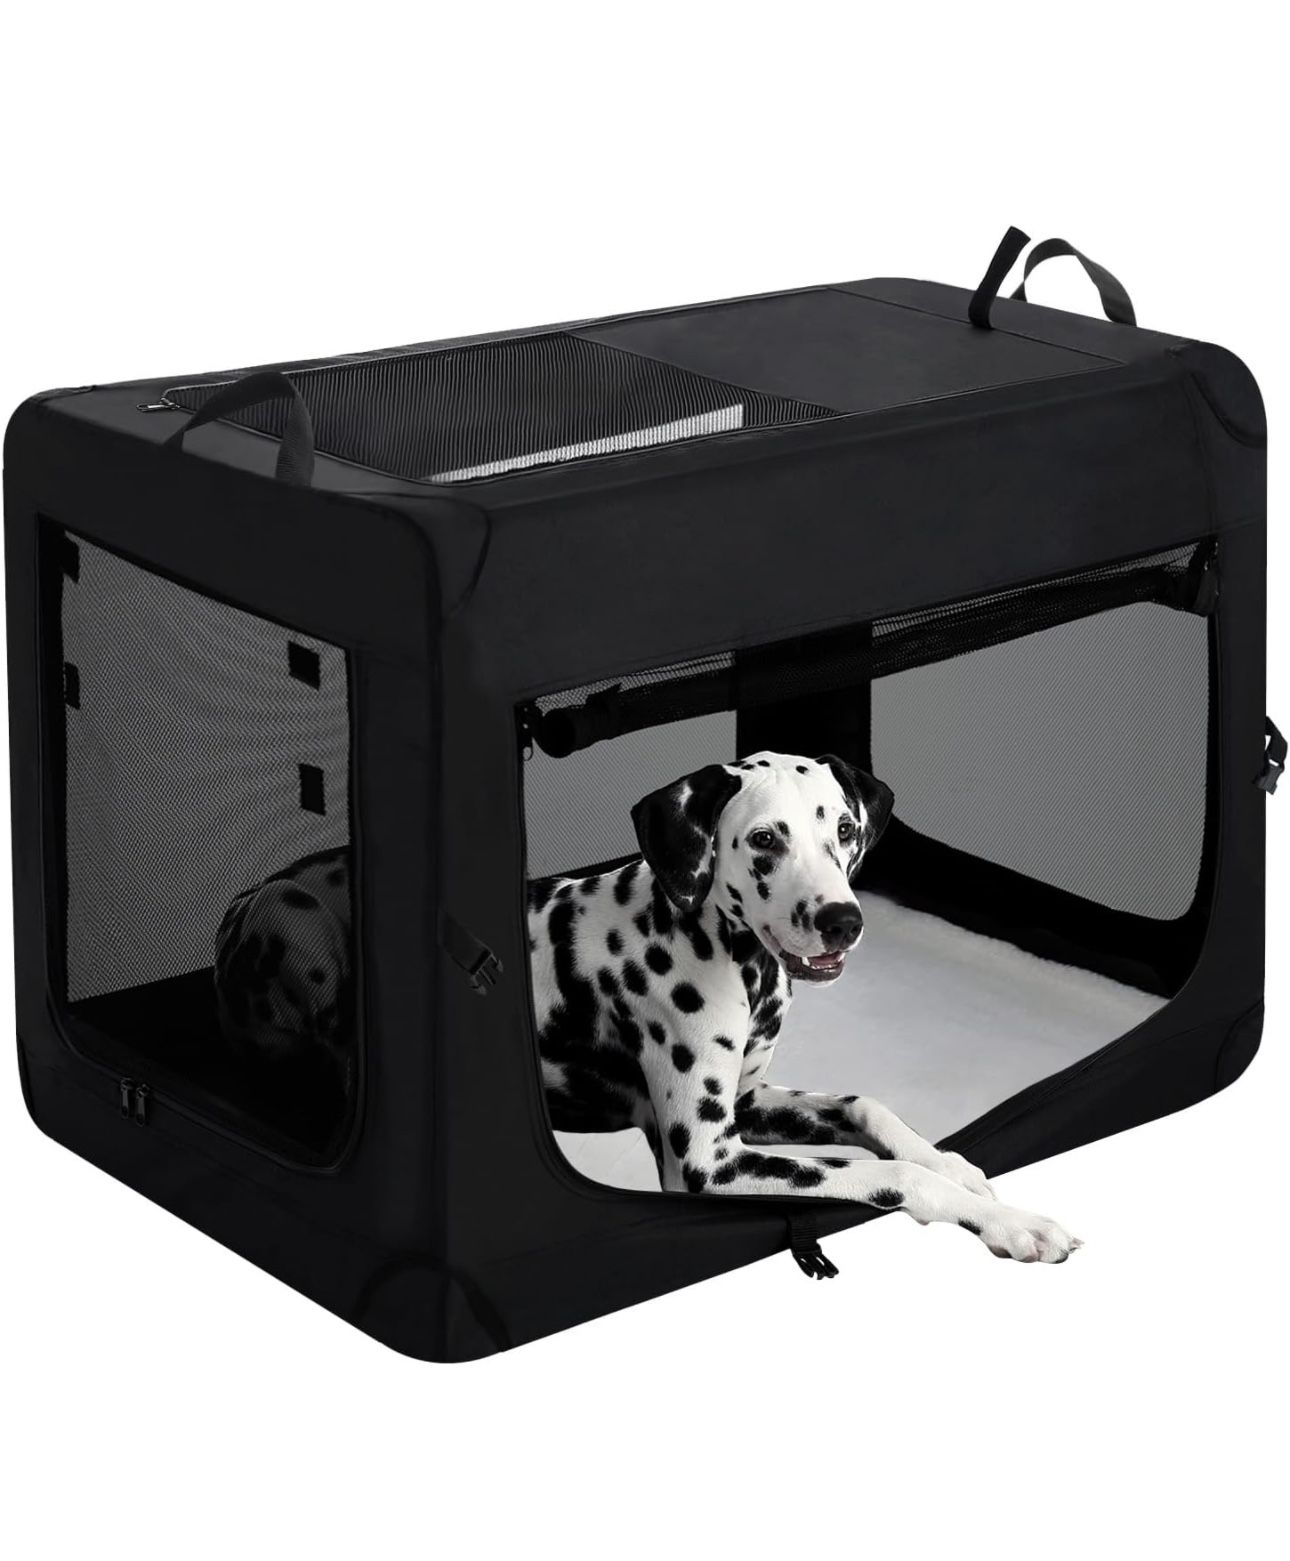 31” Soft Collapsible Travel Dog Crate 